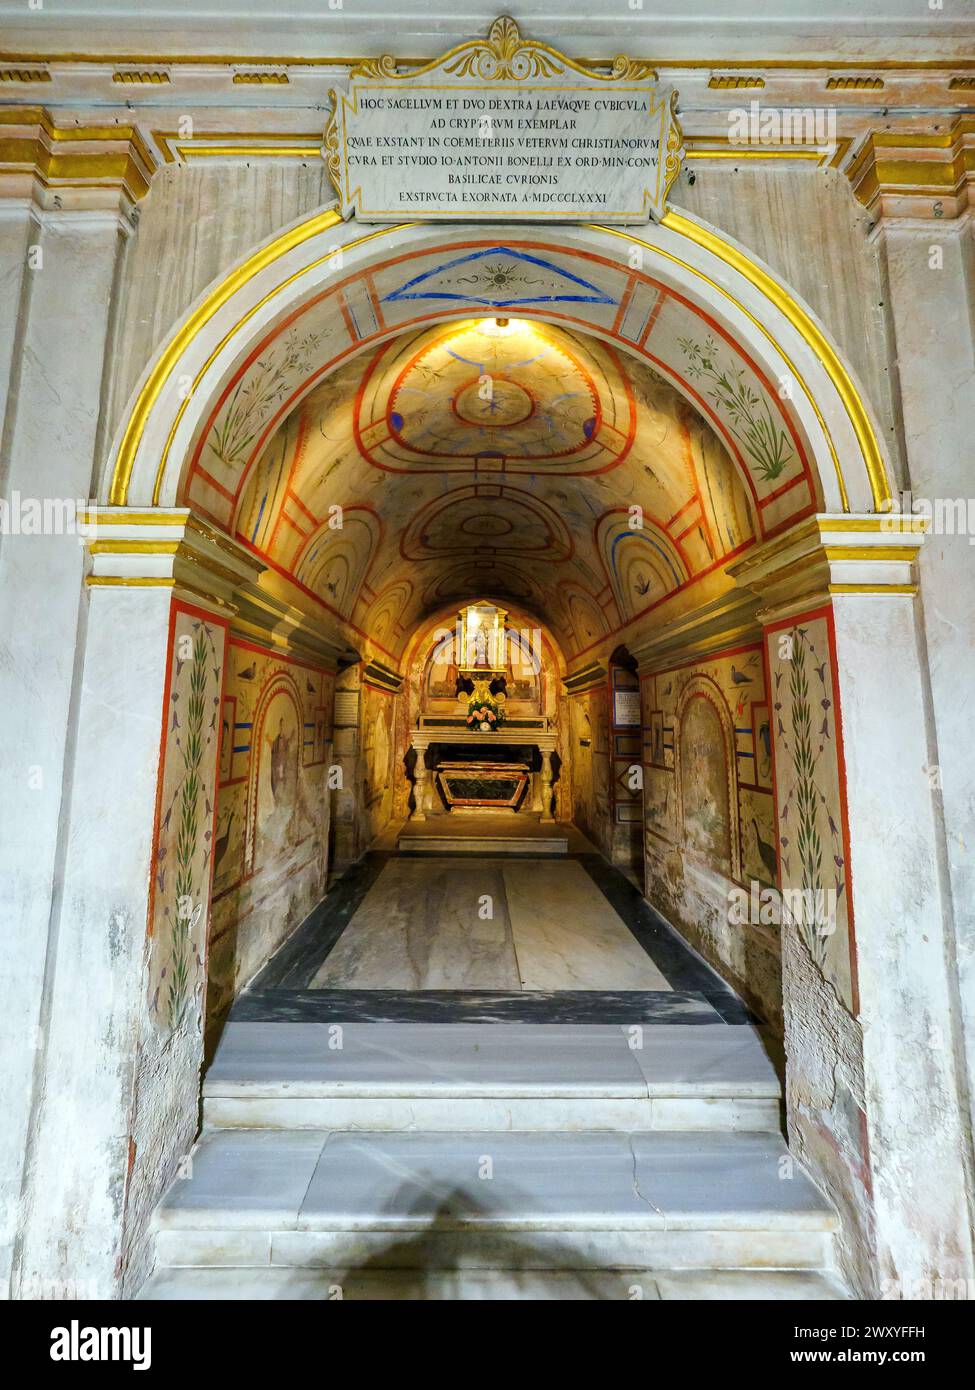 The vast crypt under the main altar,  built by Luigi Carimini in 1869-71 bringing together, in addition to the remains of the titular apostles Philip and James, the relics of various other martyrs that came to light during these excavations, and the tombs of two of Riario who once had the right to burial at the presbytery. The tempera decorations of the ambulatory are inspired by those of the catacombs of San Callisto and Domitilla. - Basilica dei Santi XII Apostoli - Rome Italy Stock Photo